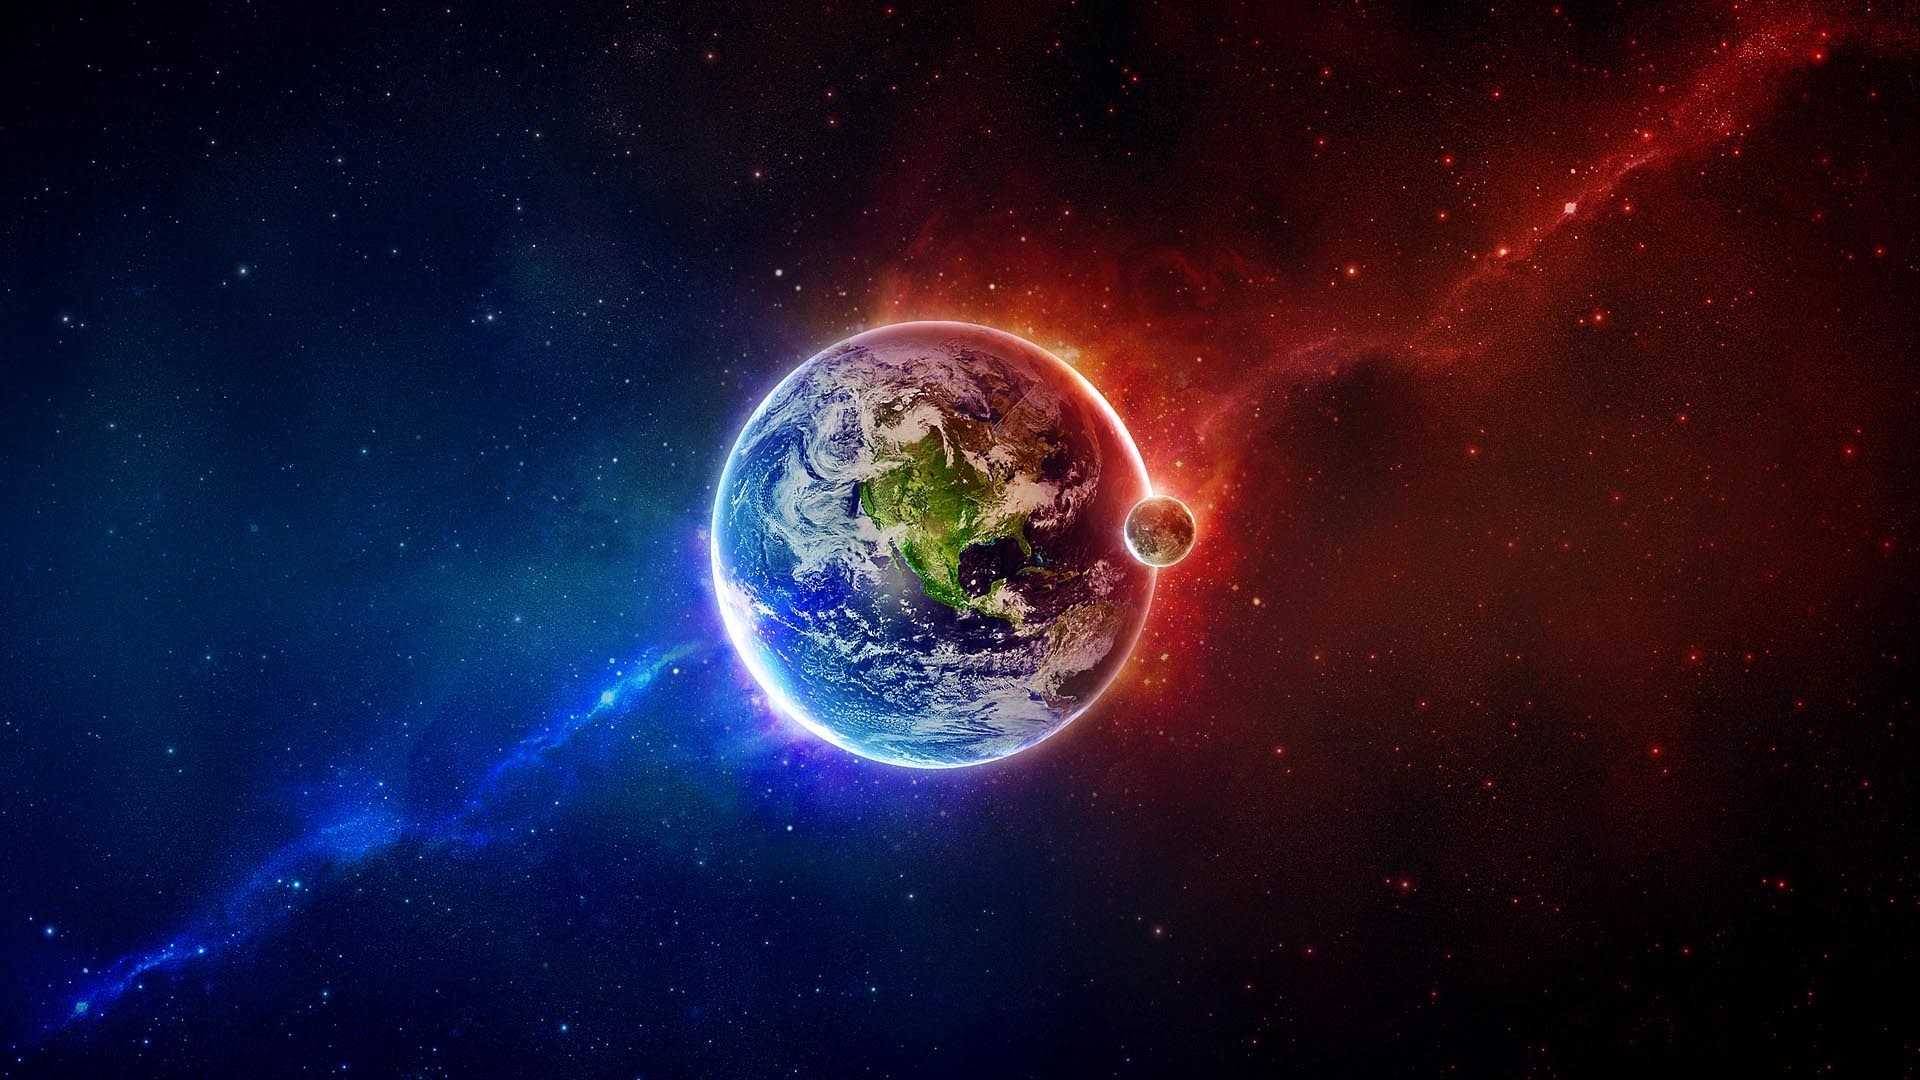 High resolution wallpapers 1920 x 1080 px Cool earth space backround by Edward Robertson for – TrunkWeed.com